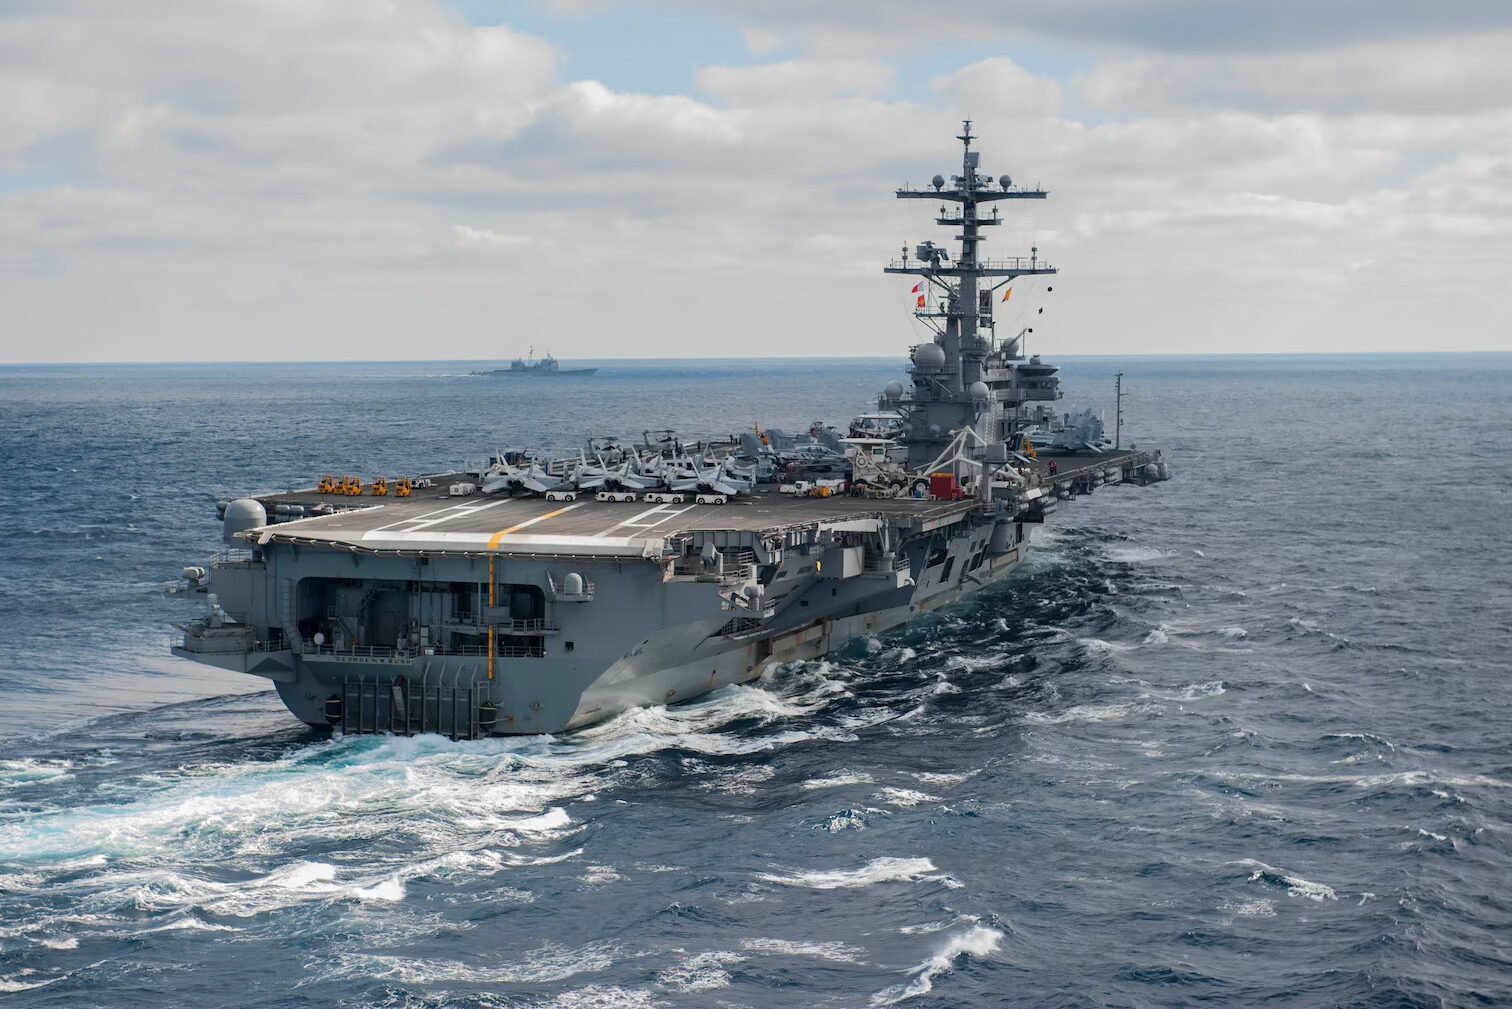 U.S. To Keep Carrier Group In Mediterranean After Deadly Confrontation With Iran In Syria